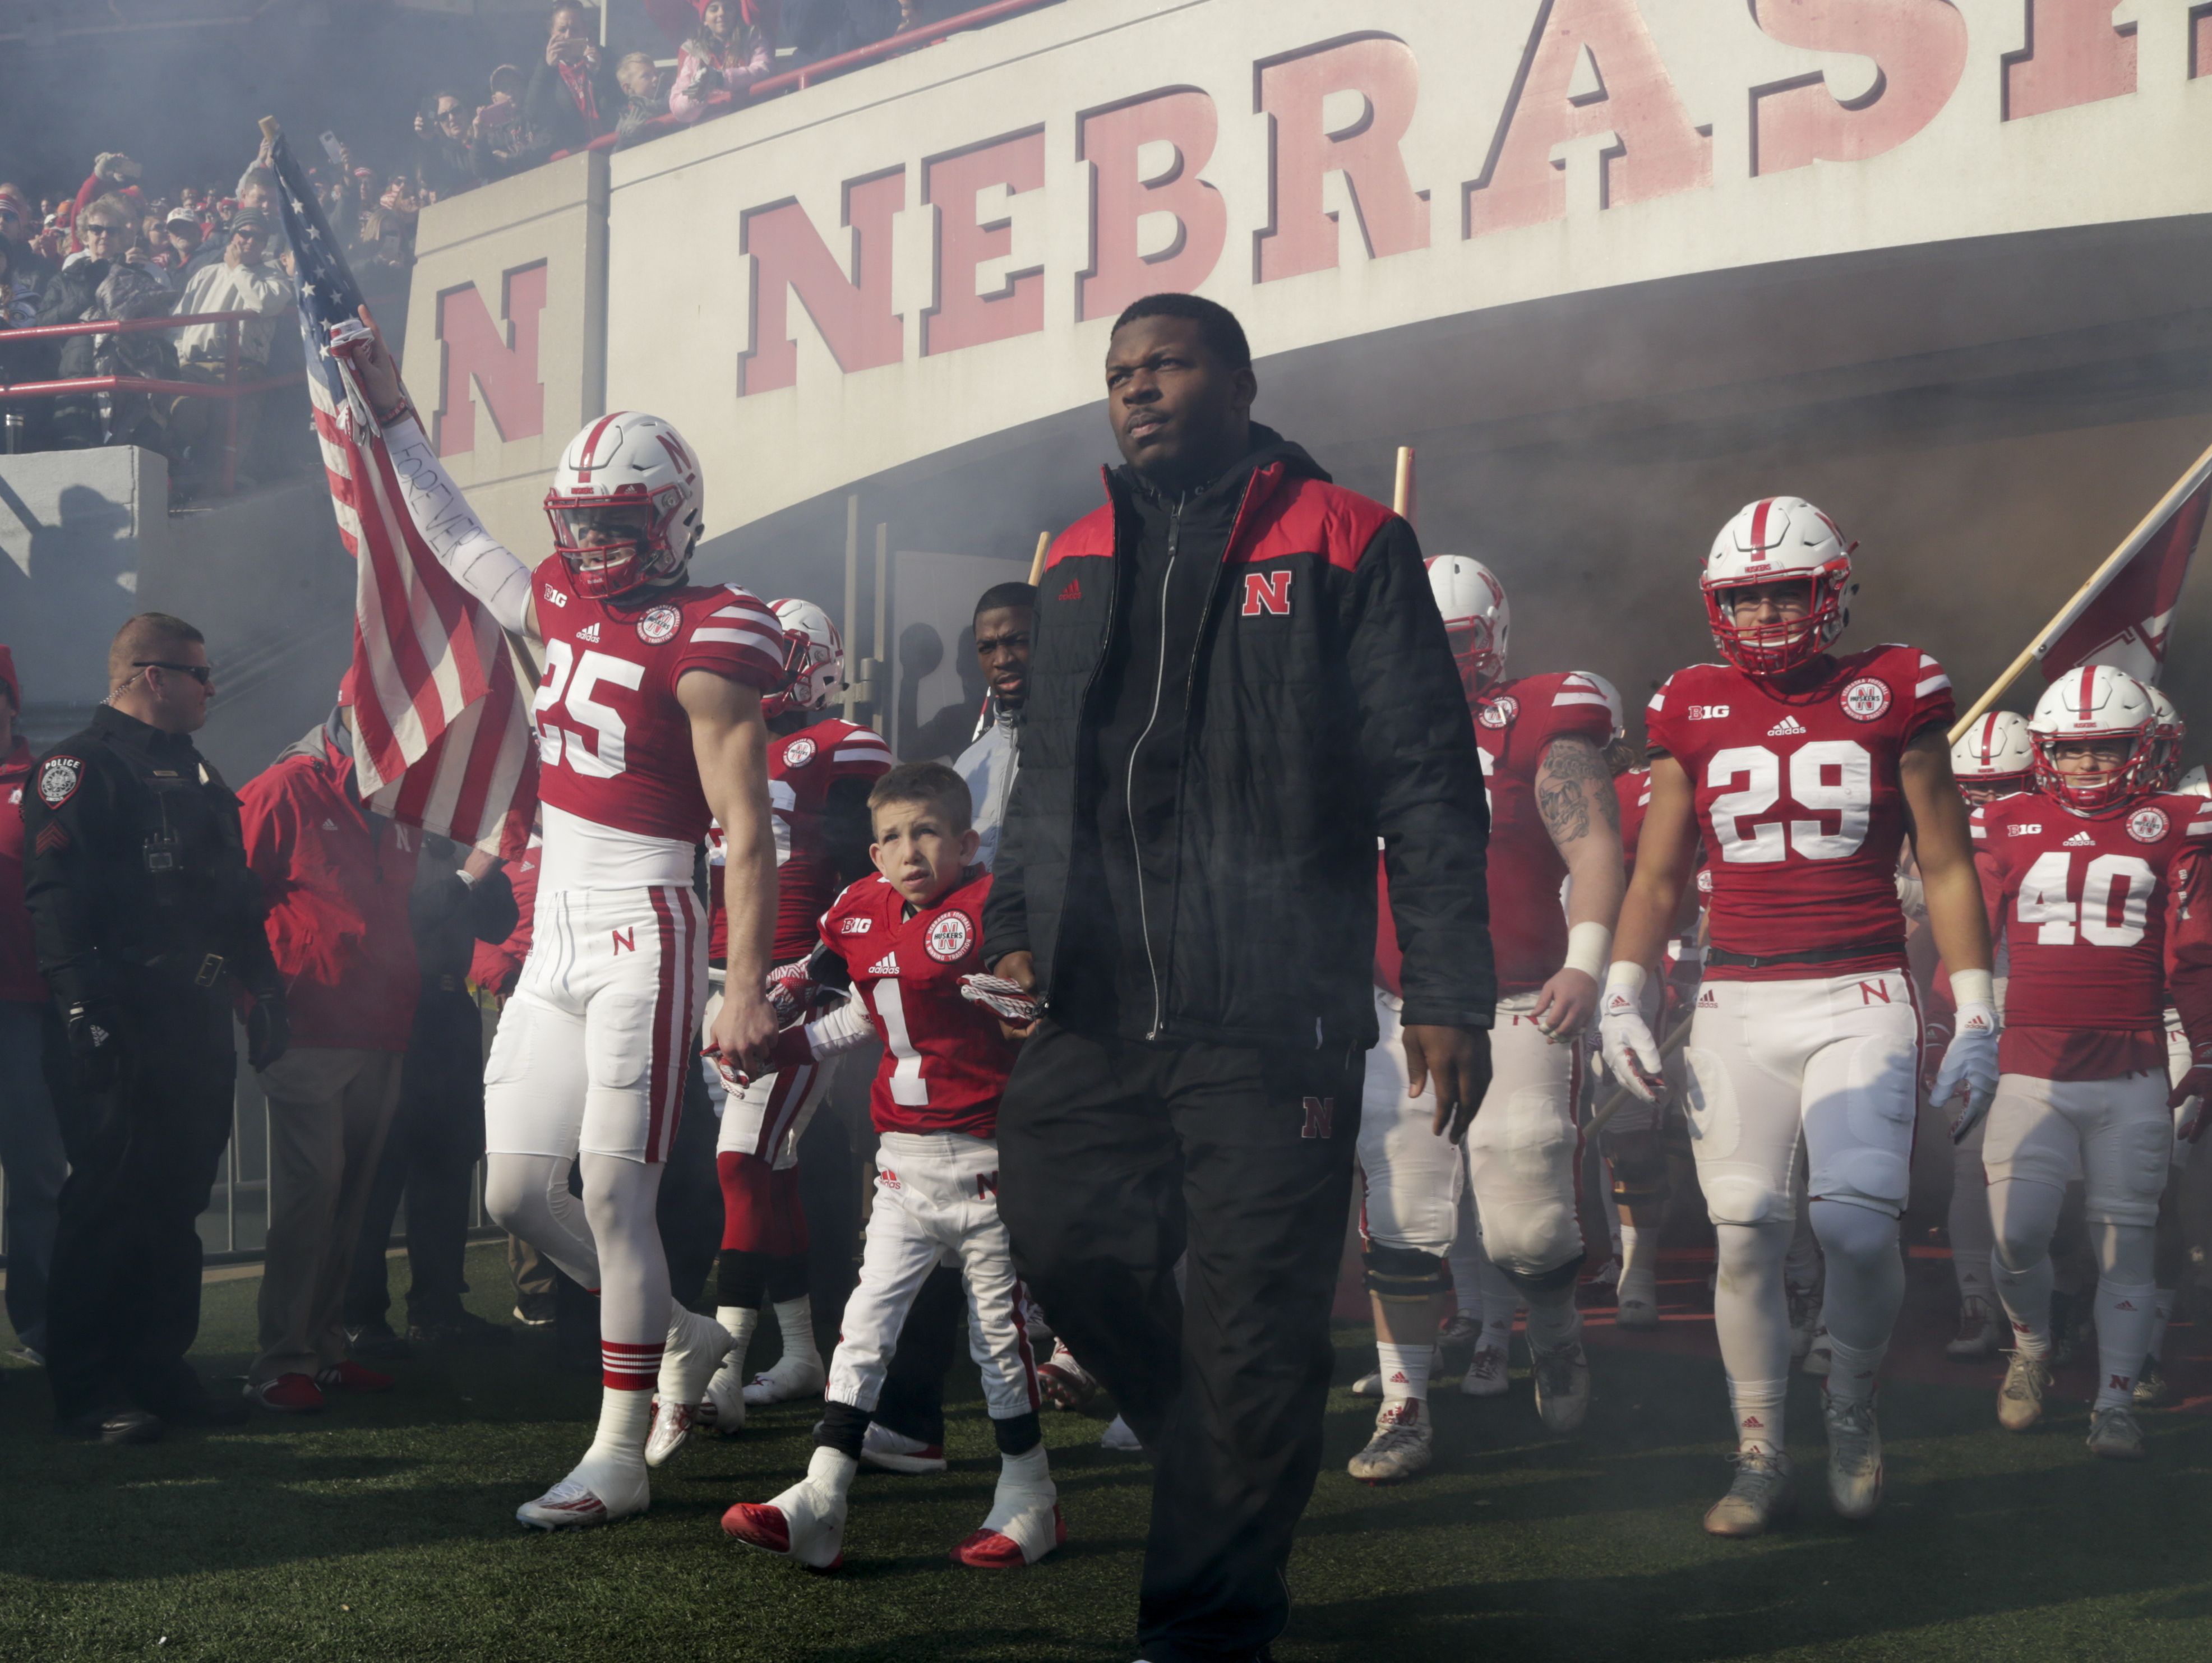 8 year-old Jack Johnson (1), who suffers from Menkes disease, leads the Nebraska team onto the field at Memorial Stadium between Nate Gerry (25) and quarterback Tommy Armstrong Jr., right.